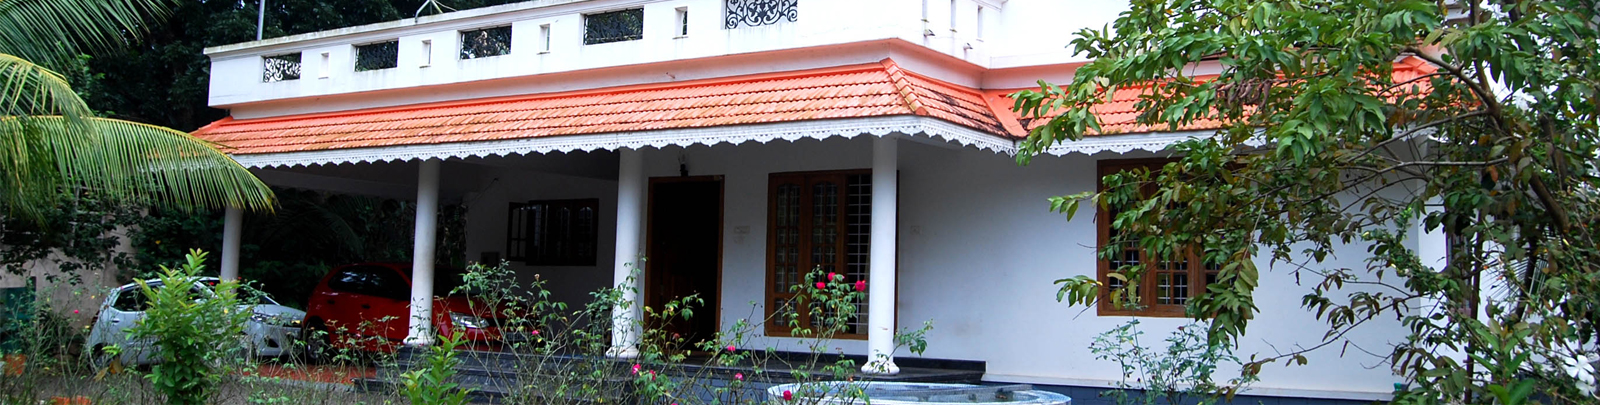 Vacation home for rent in Kottayam